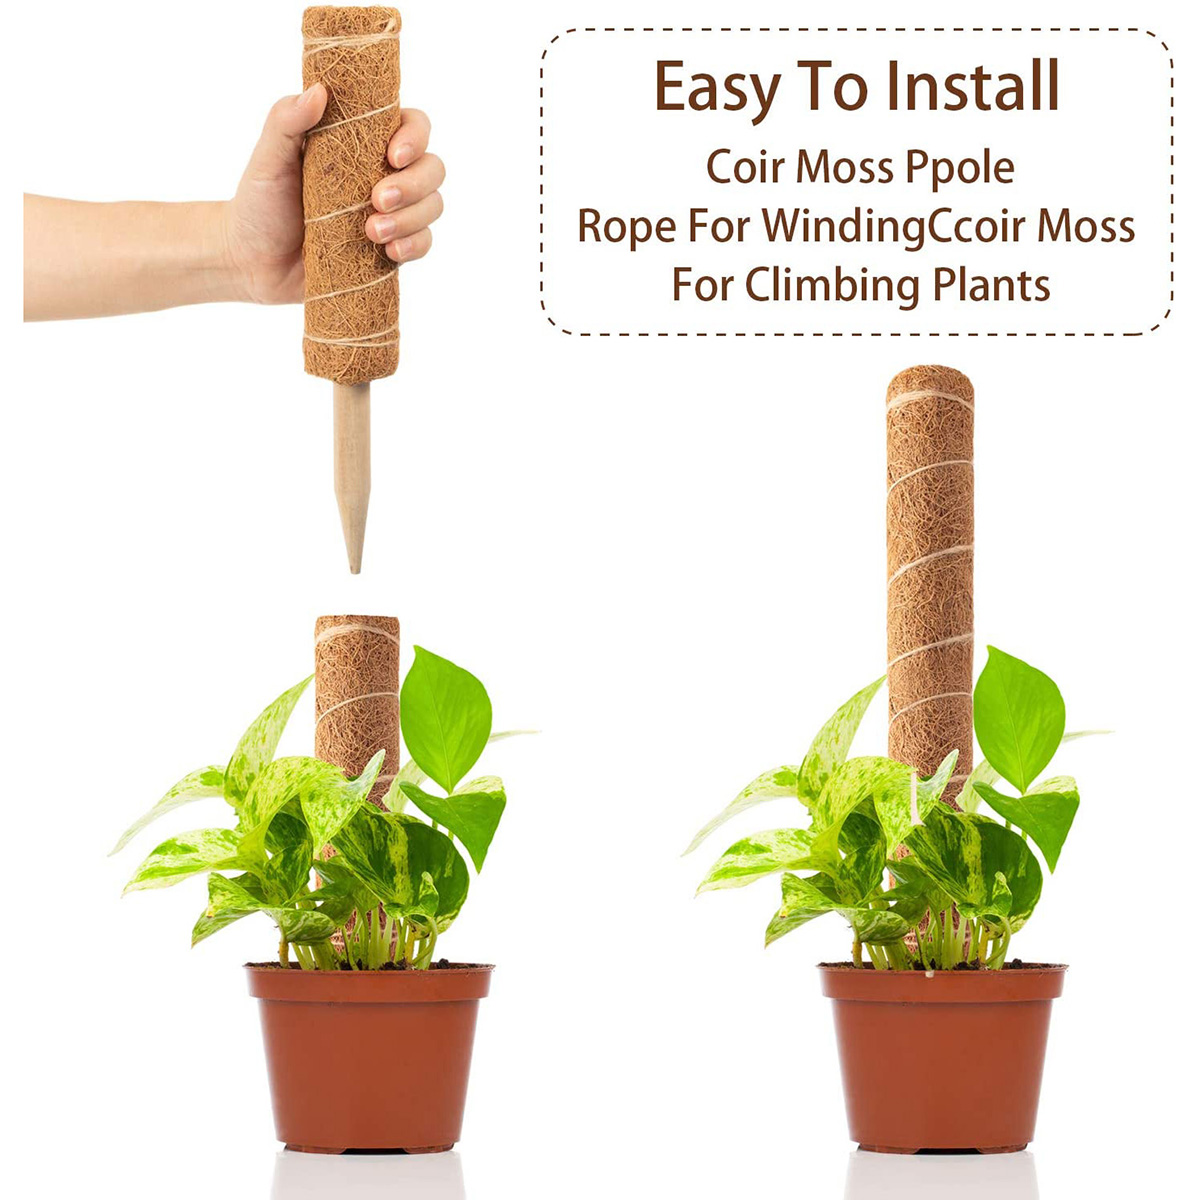 4-Pack-Coir-Totem-Pole-Plant-Coir-Moss-Stick-Totem-Pole-for-Climmbing-Plant-Support-Extension-Climbi-1824346-4